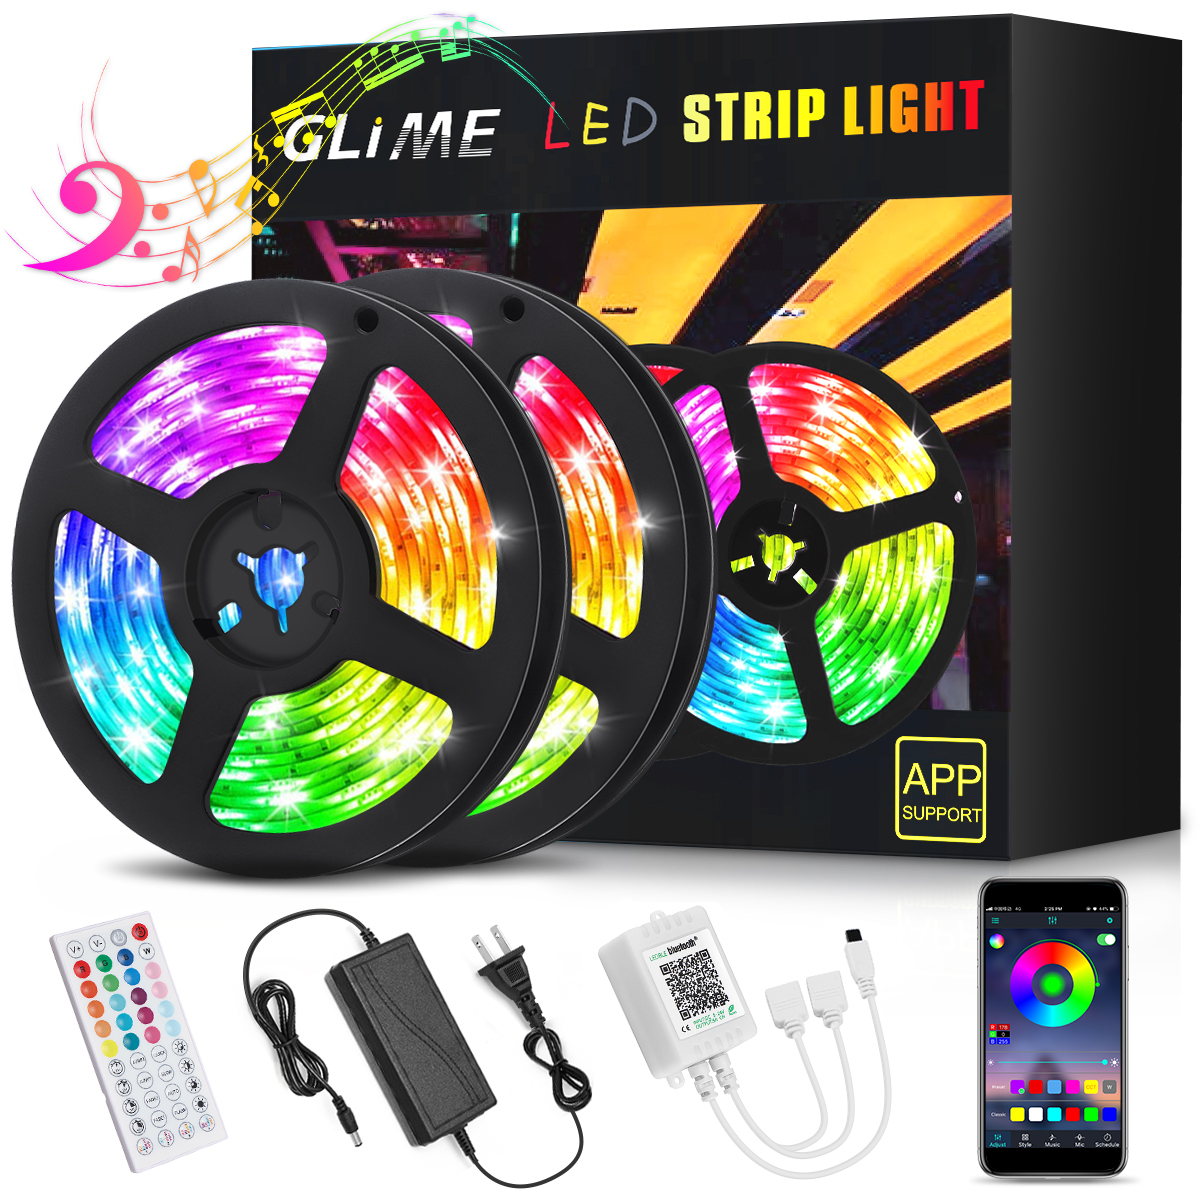 RGB-Led-Strip-Lights-GLIME-10m-Led-Strips-with-App-Controlled--Music-Sync-5050-Flexible-Color-Changi-1780652-1